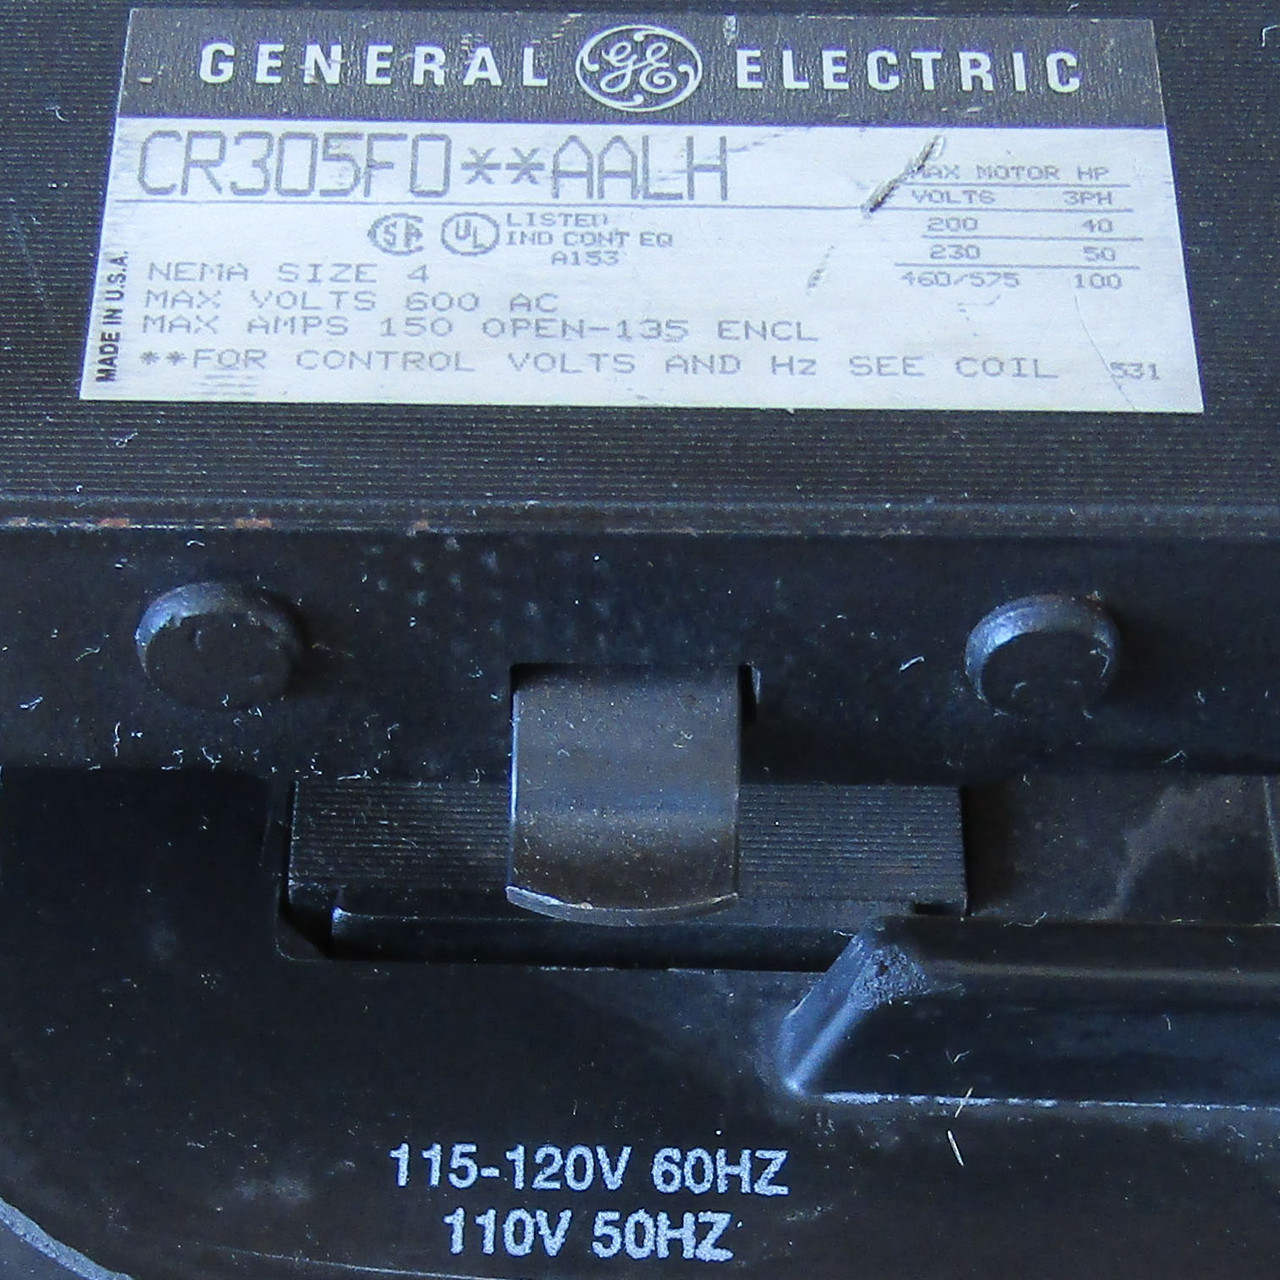 General Electric CR305F0**AALH SZ 4 Magnetic Contactor 150A 3PH 115-120V Coil - Used